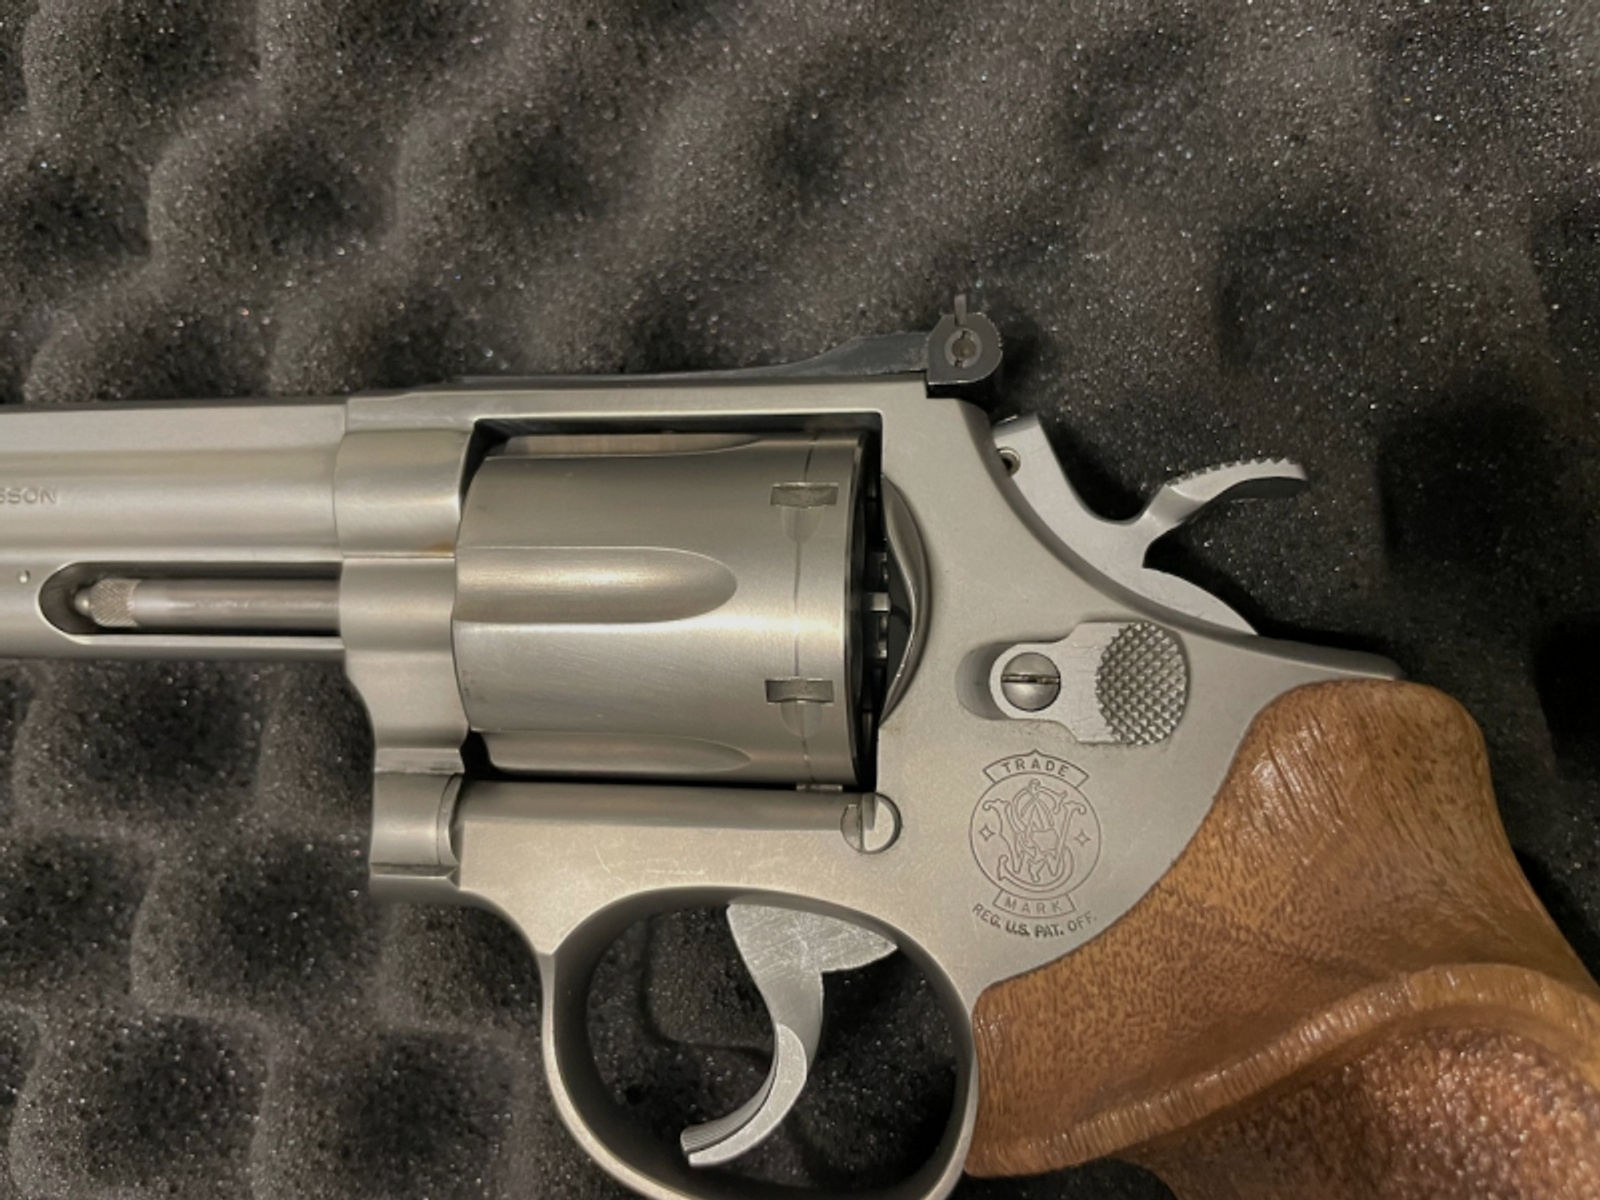 Smith &Wesson Mod.686-4 Target Campion